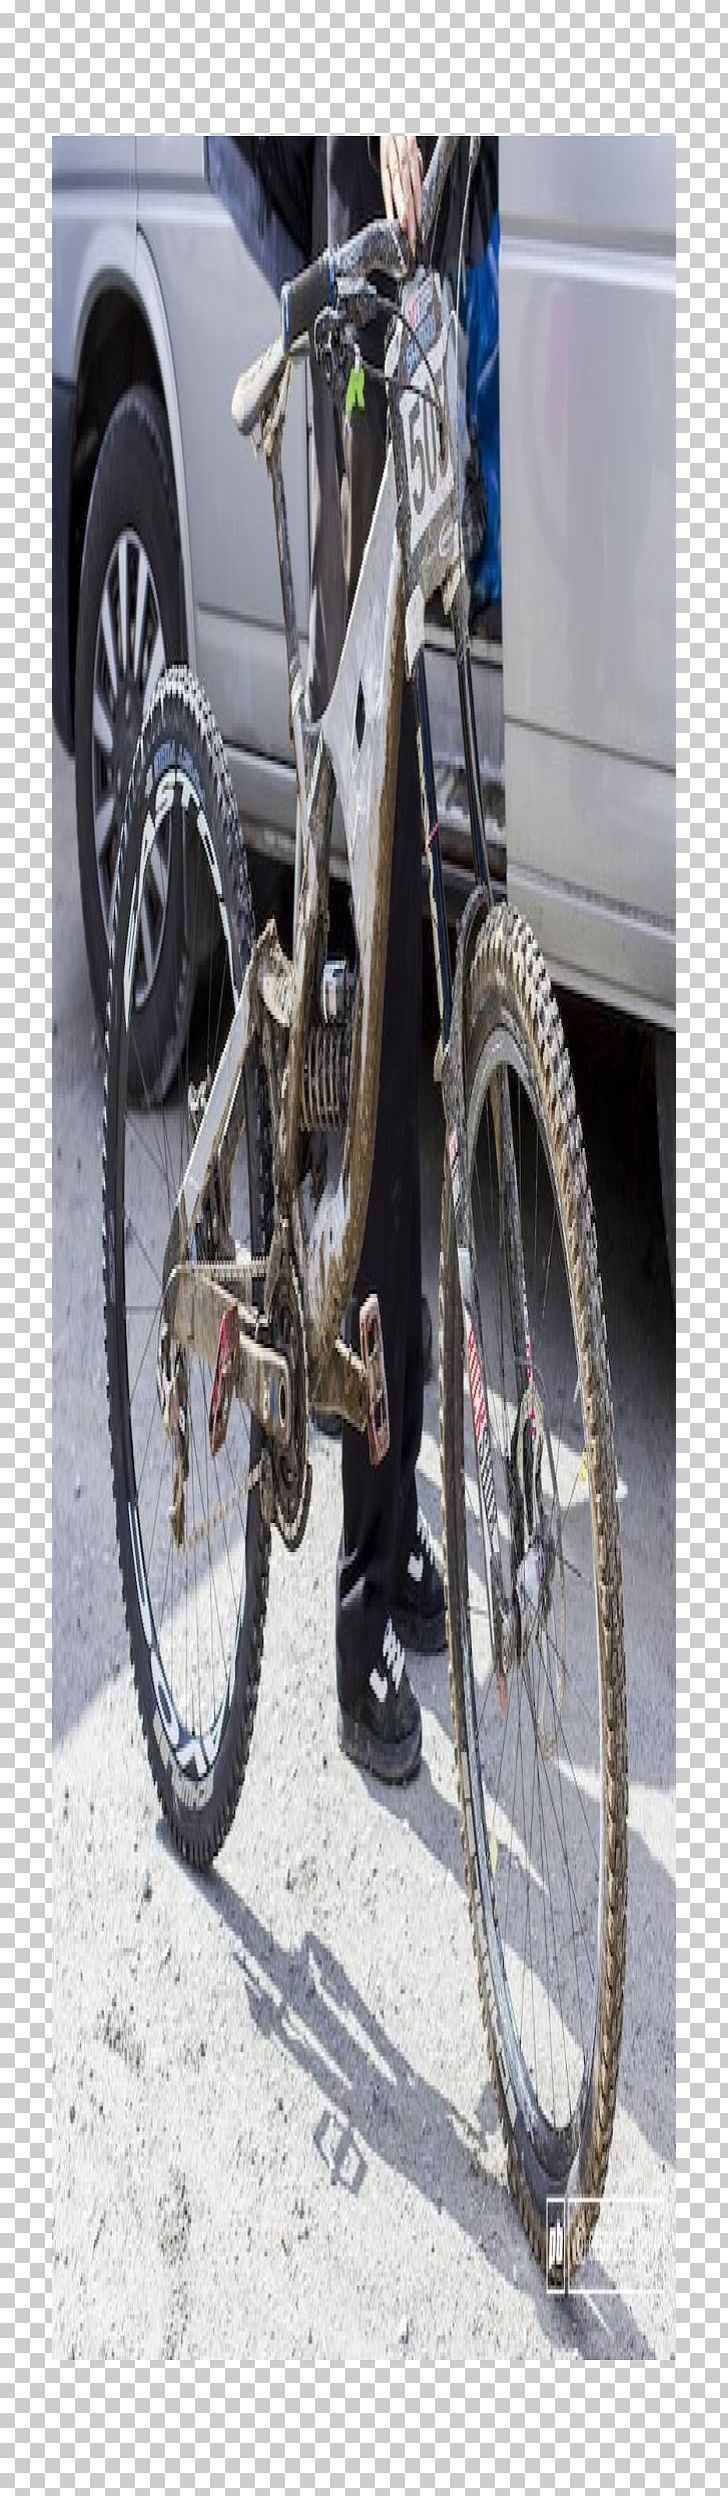 Bicycle Pedals Mountain Bike Bicycle Wheels Motor Vehicle Tires Downhill Bike PNG, Clipart, Auto Part, Bicycle, Bicycle Accessory, Bicycle Forks, Bicycle Frame Free PNG Download